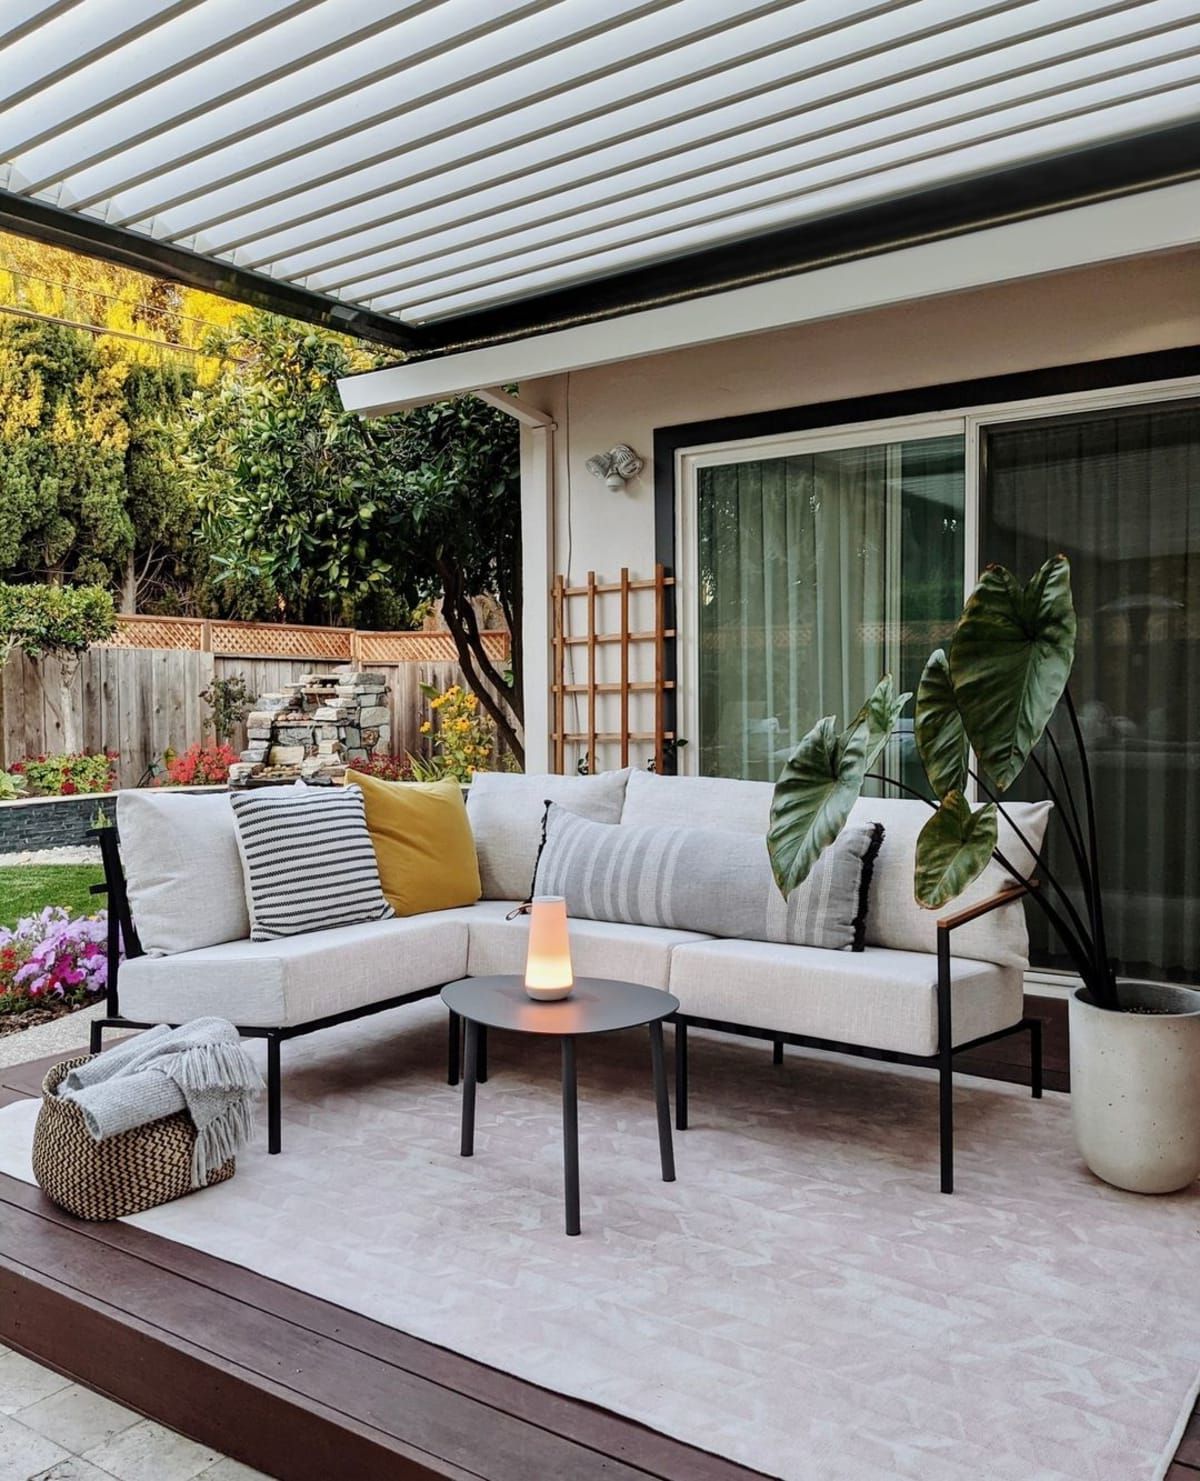 Loveseat Chairs For Backyard In Latest 8 Best Durable Outdoor Furniture Materials (View 15 of 15)